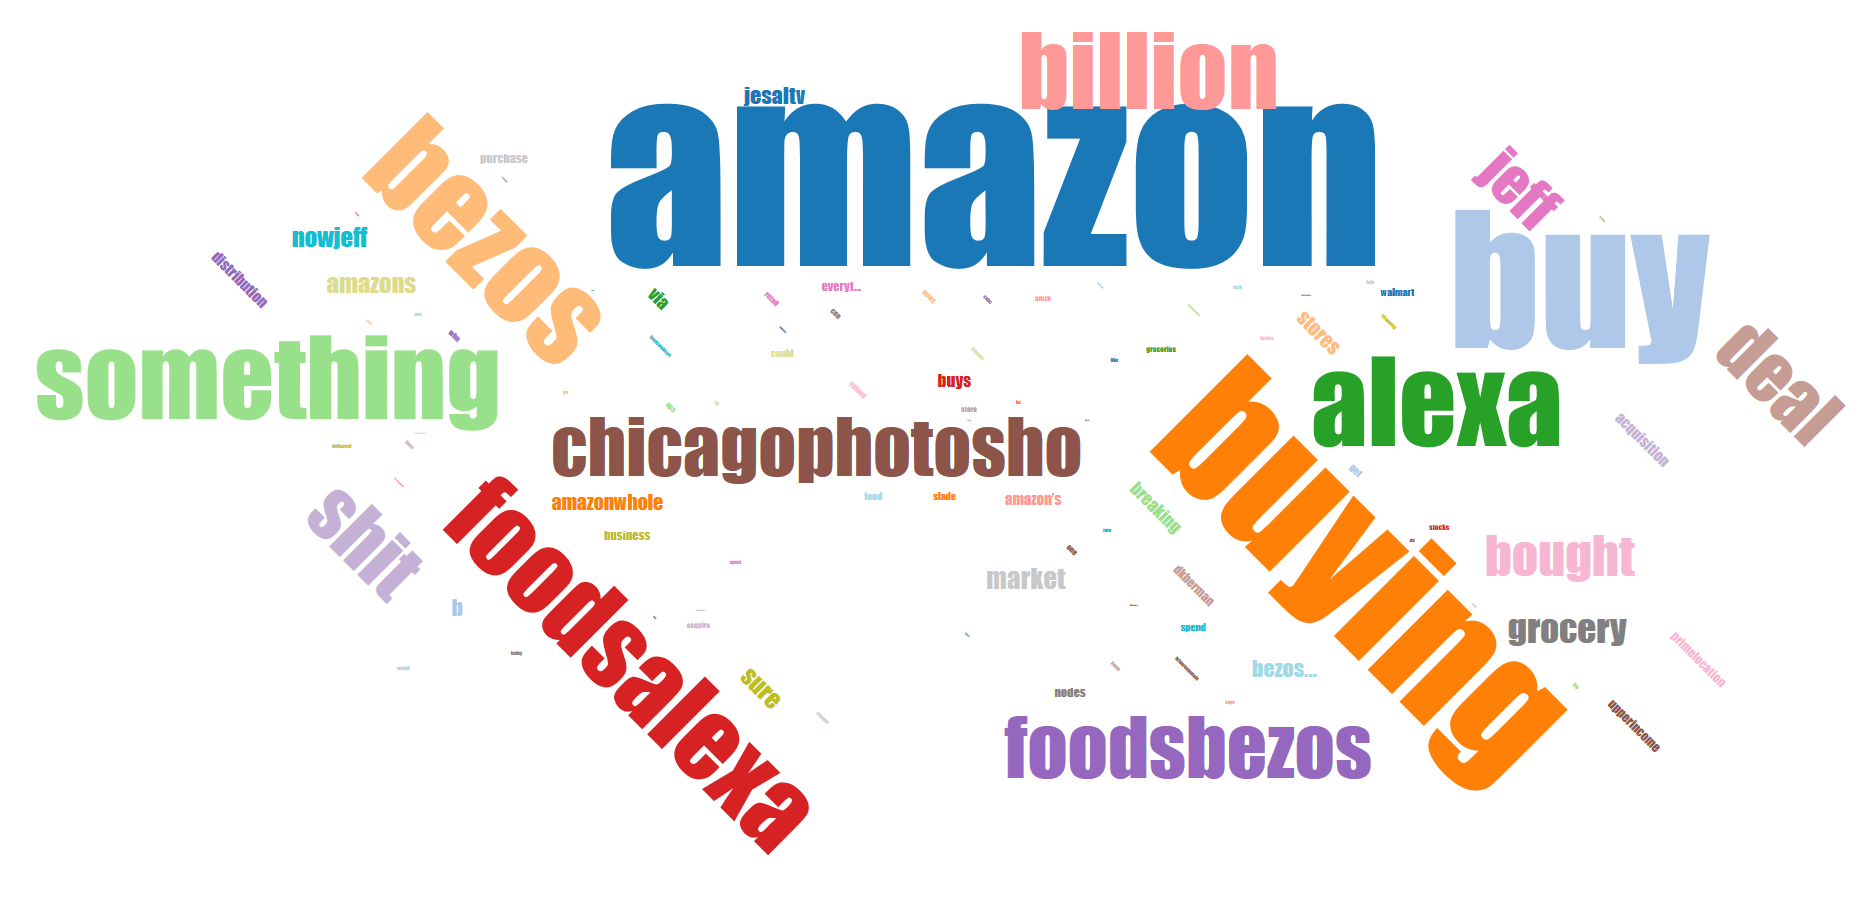 Word cloud with "amazon" the largest, followed by "buying", "bezos", "something", "billion", and "foodsalexa"